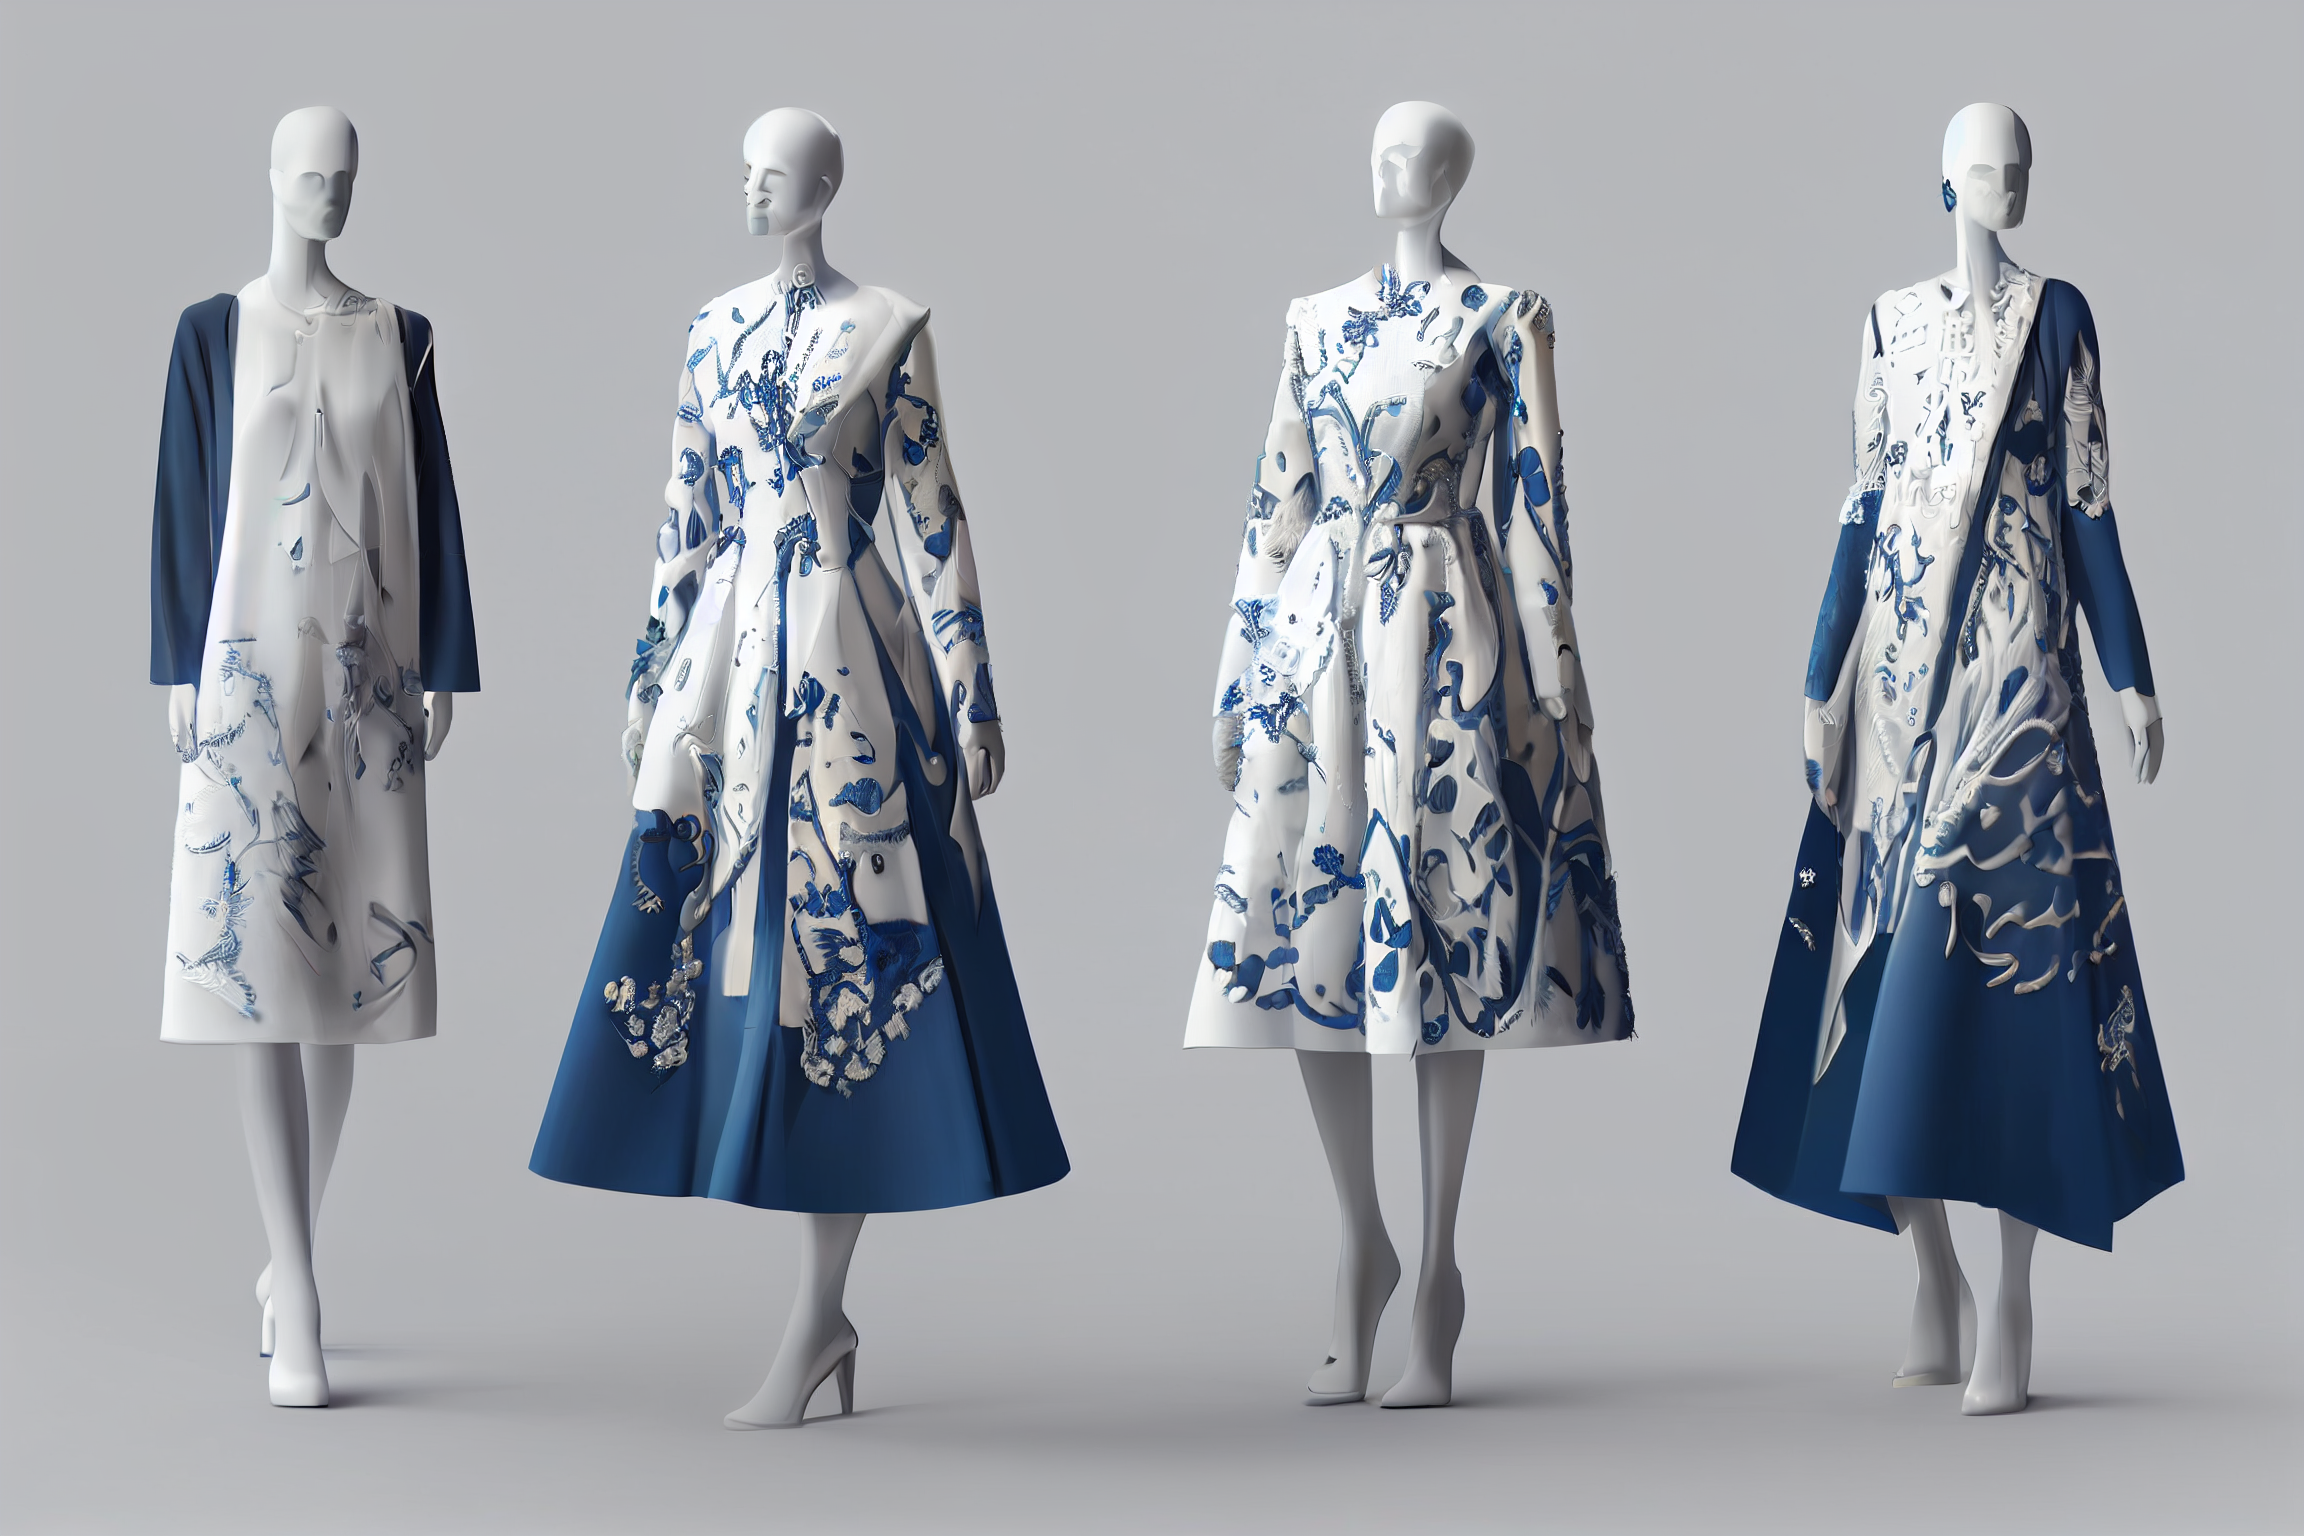 prompthunt: Three Fashion Design Renderings , white clothing mannequin,  Blue and white dress, Embroidered clothing pattern of glacier, Fur fabric,  high-quality rendering, 3d, fine details, illustrations, lifelike, c4d, 8k